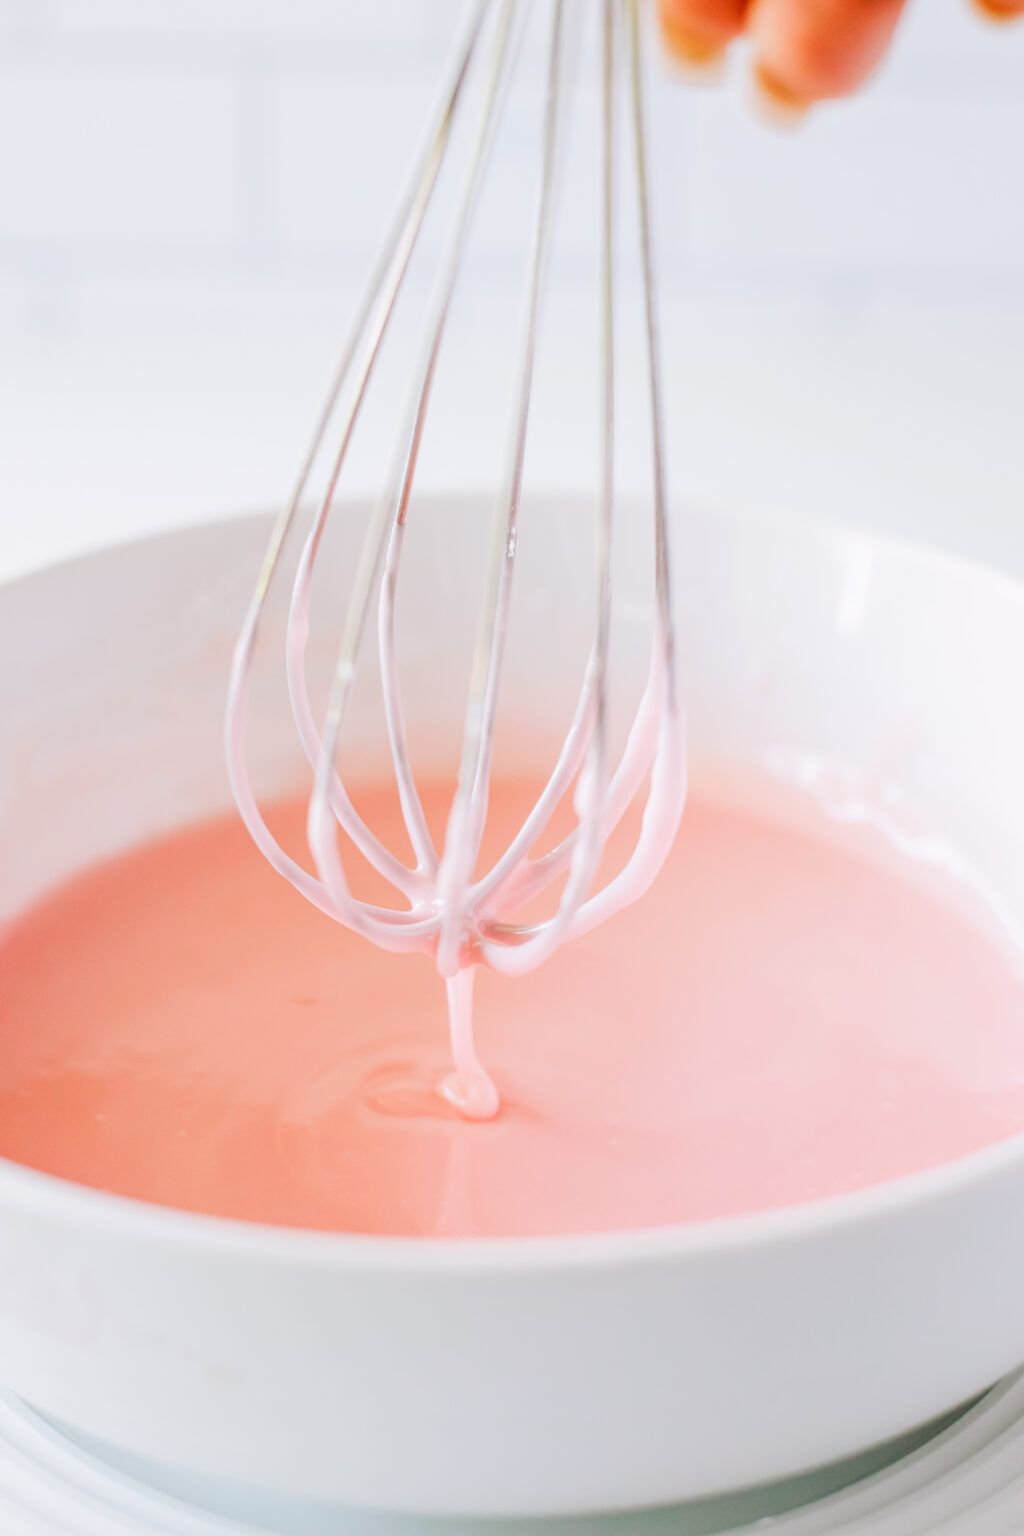 whisk dipped into pink glaze